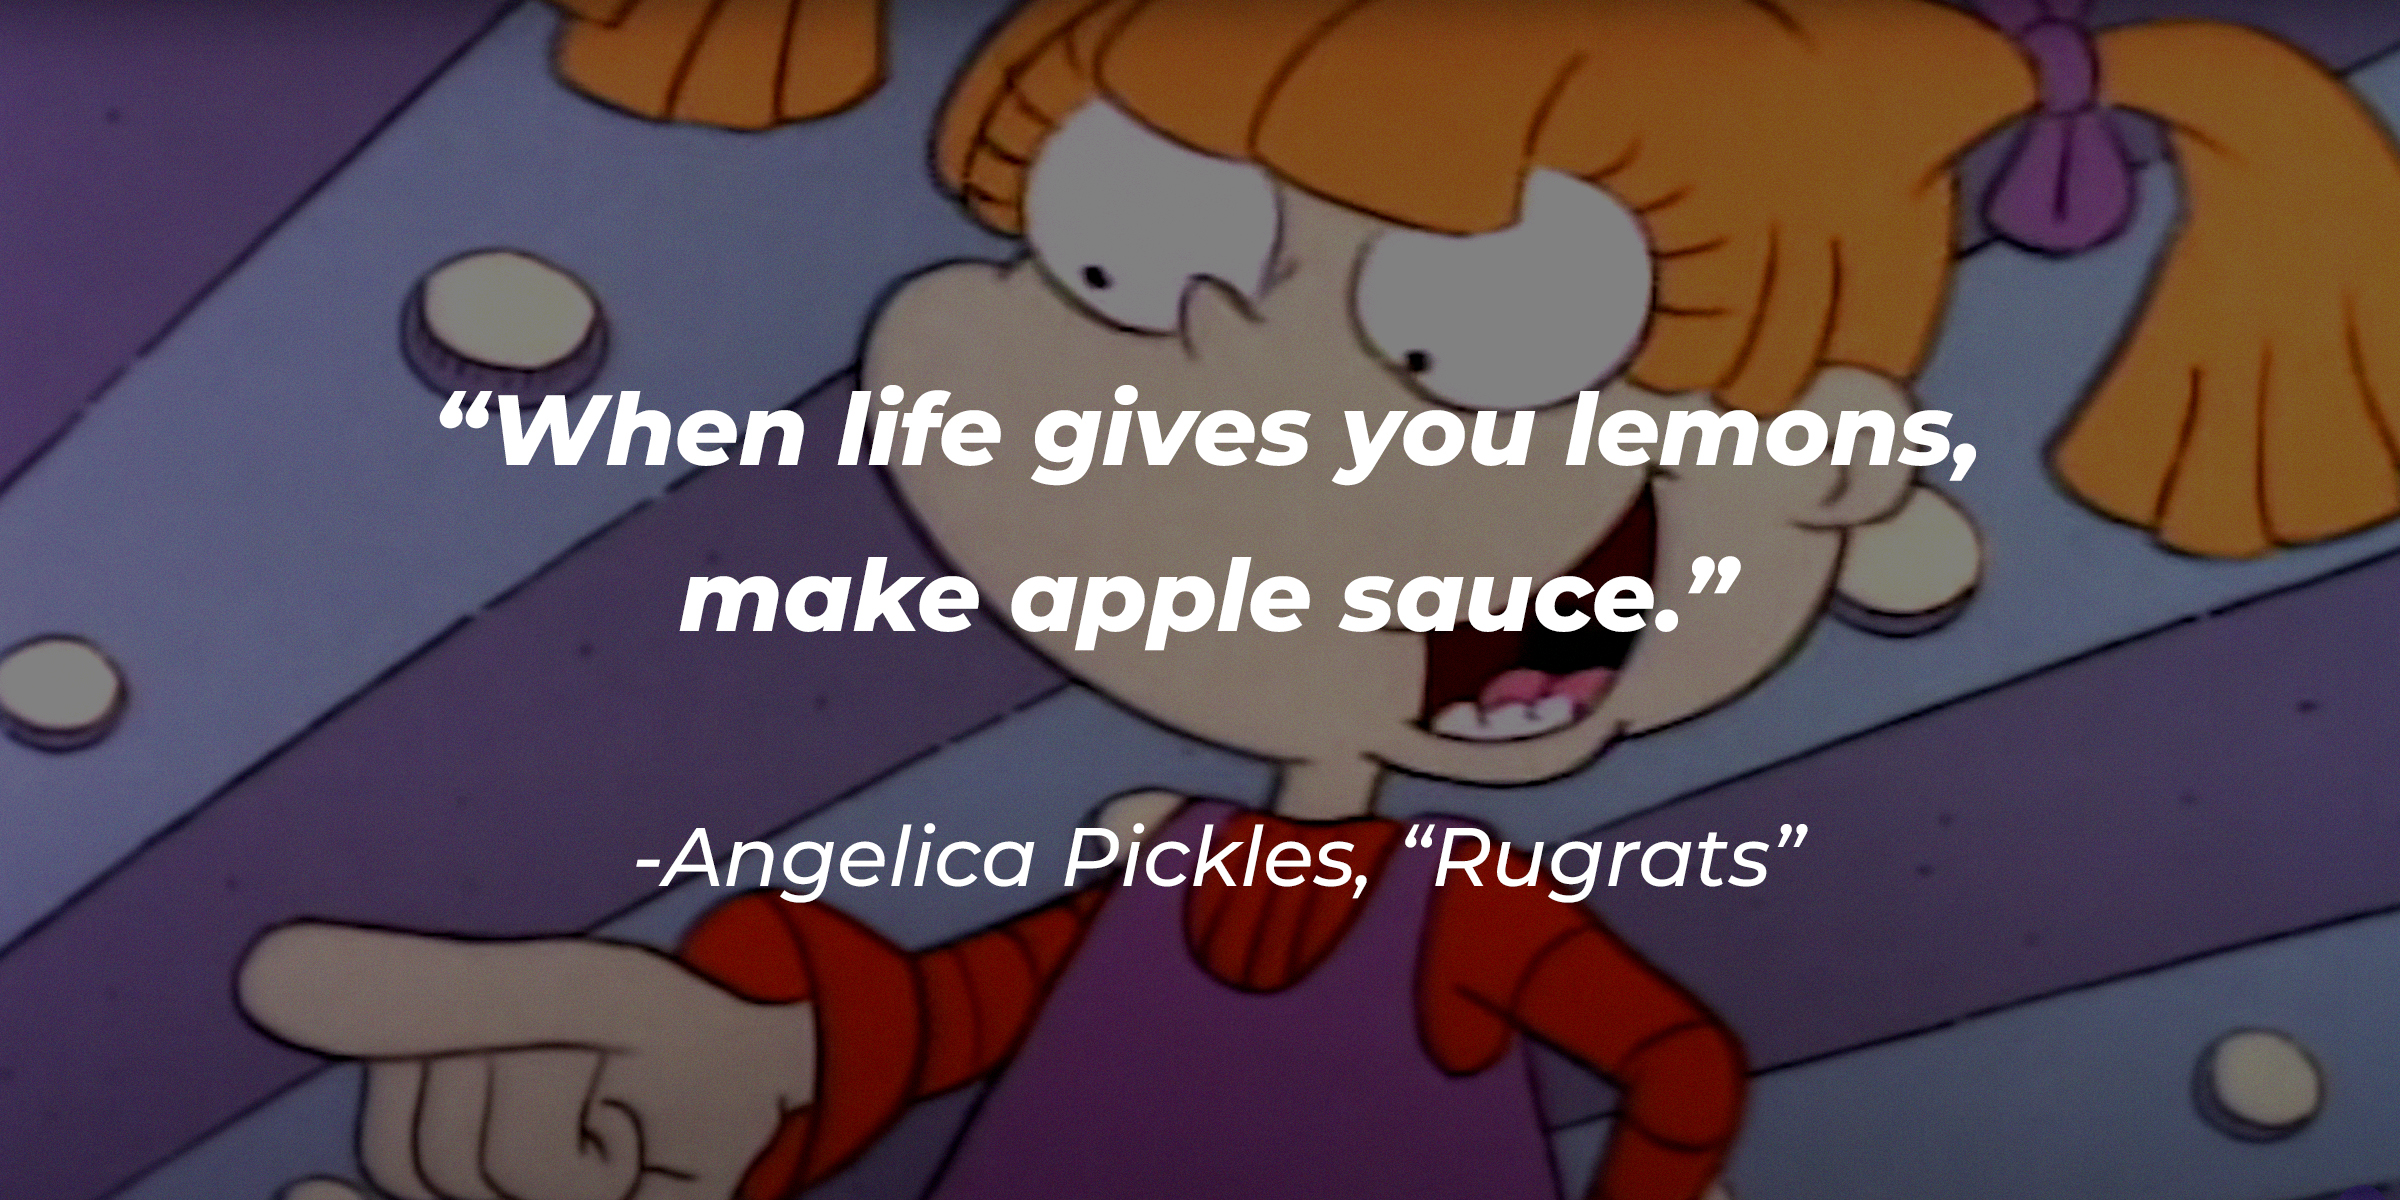 Angelica Pickes with her quote: "When life gives you lemons, make apple sauce." | Source: Facebook.com/Rugrats